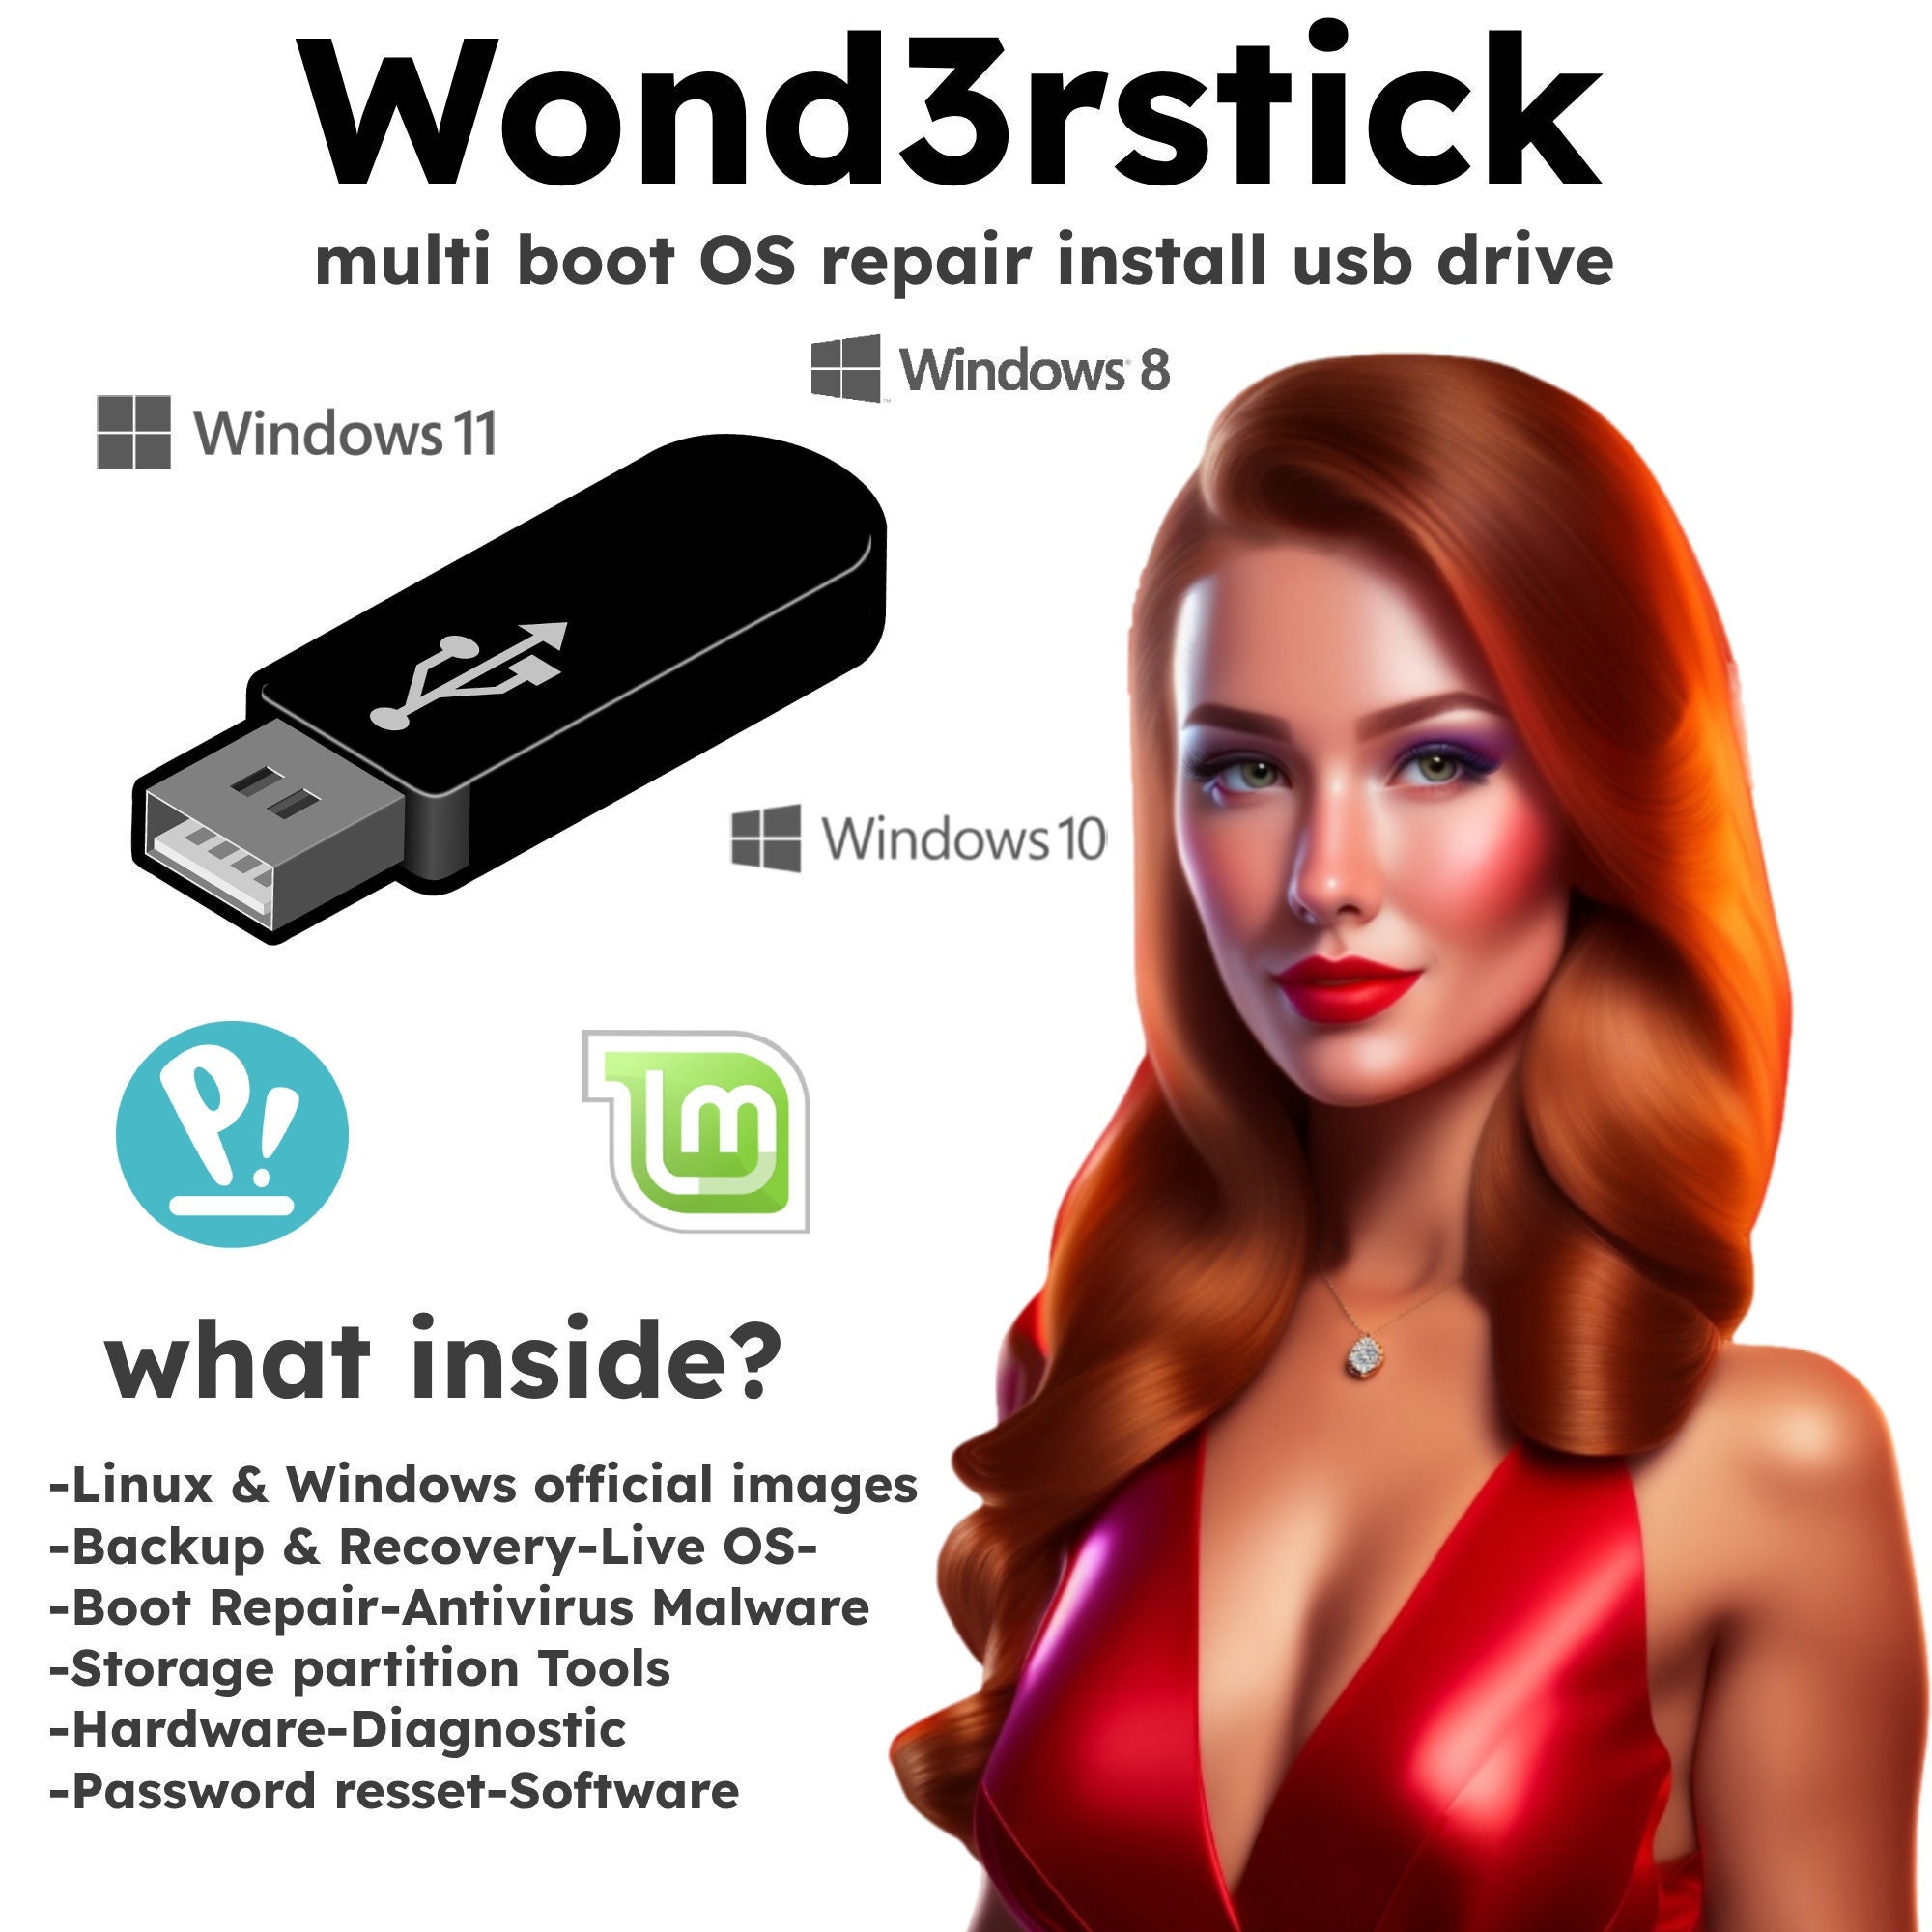 Now you can buy Windows 11 on a USB flash drive (physical media arrives 7  months after digital downloads) - Liliputing